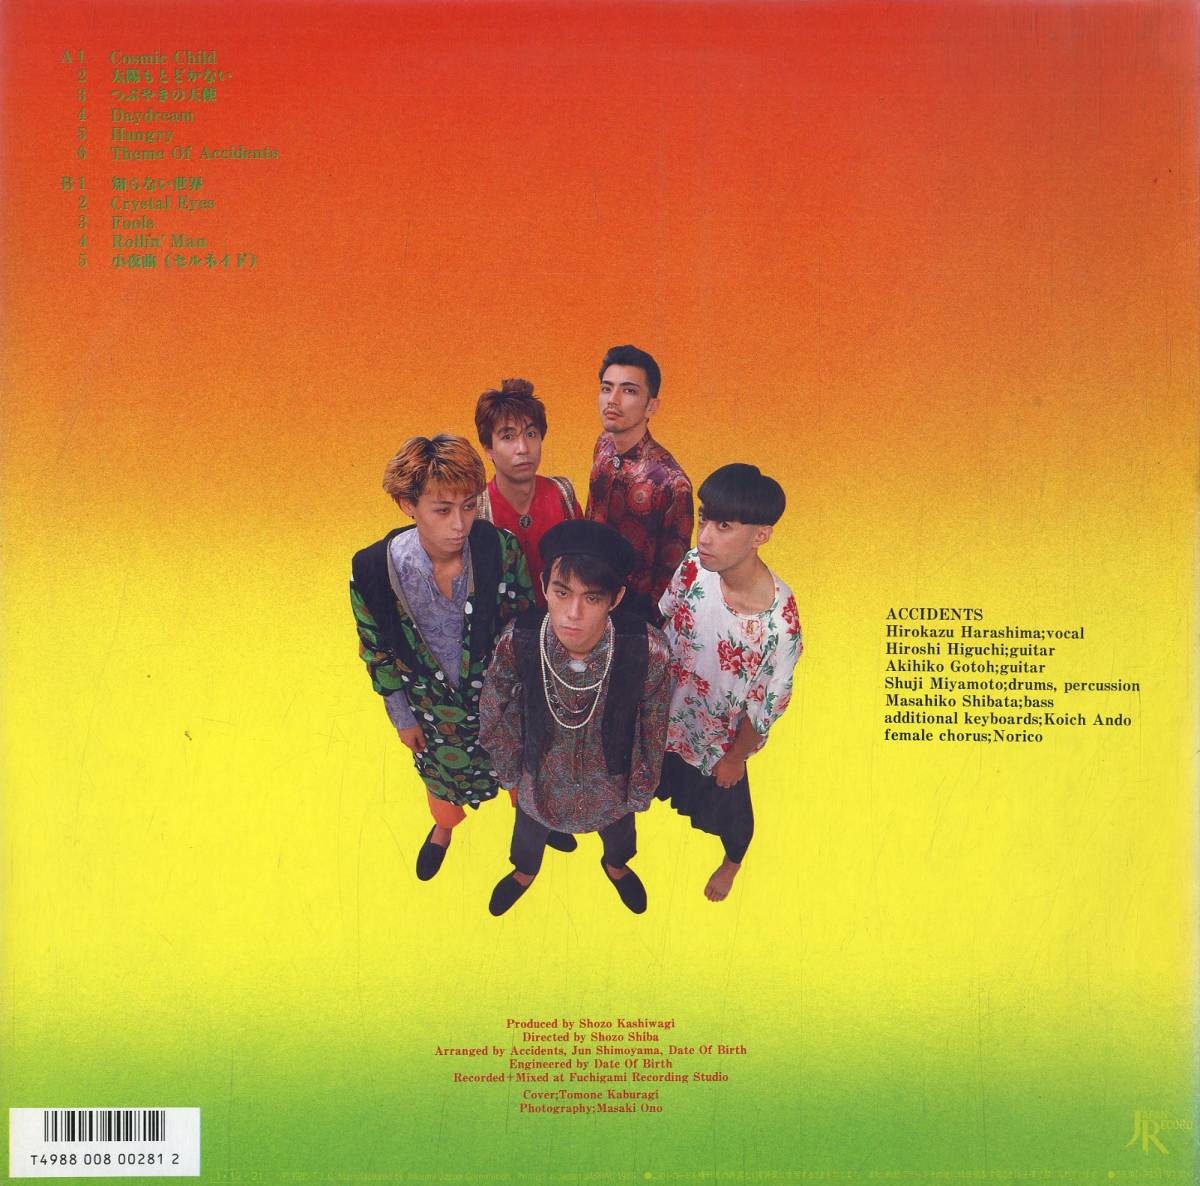 A00516124/LP/THE ACCIDENTS(ジ・アクシデンツ)「知らない世界(1985年・28JAL-3034・下山淳・DATE OF BIRTH編曲参加・インディーロック)_画像2